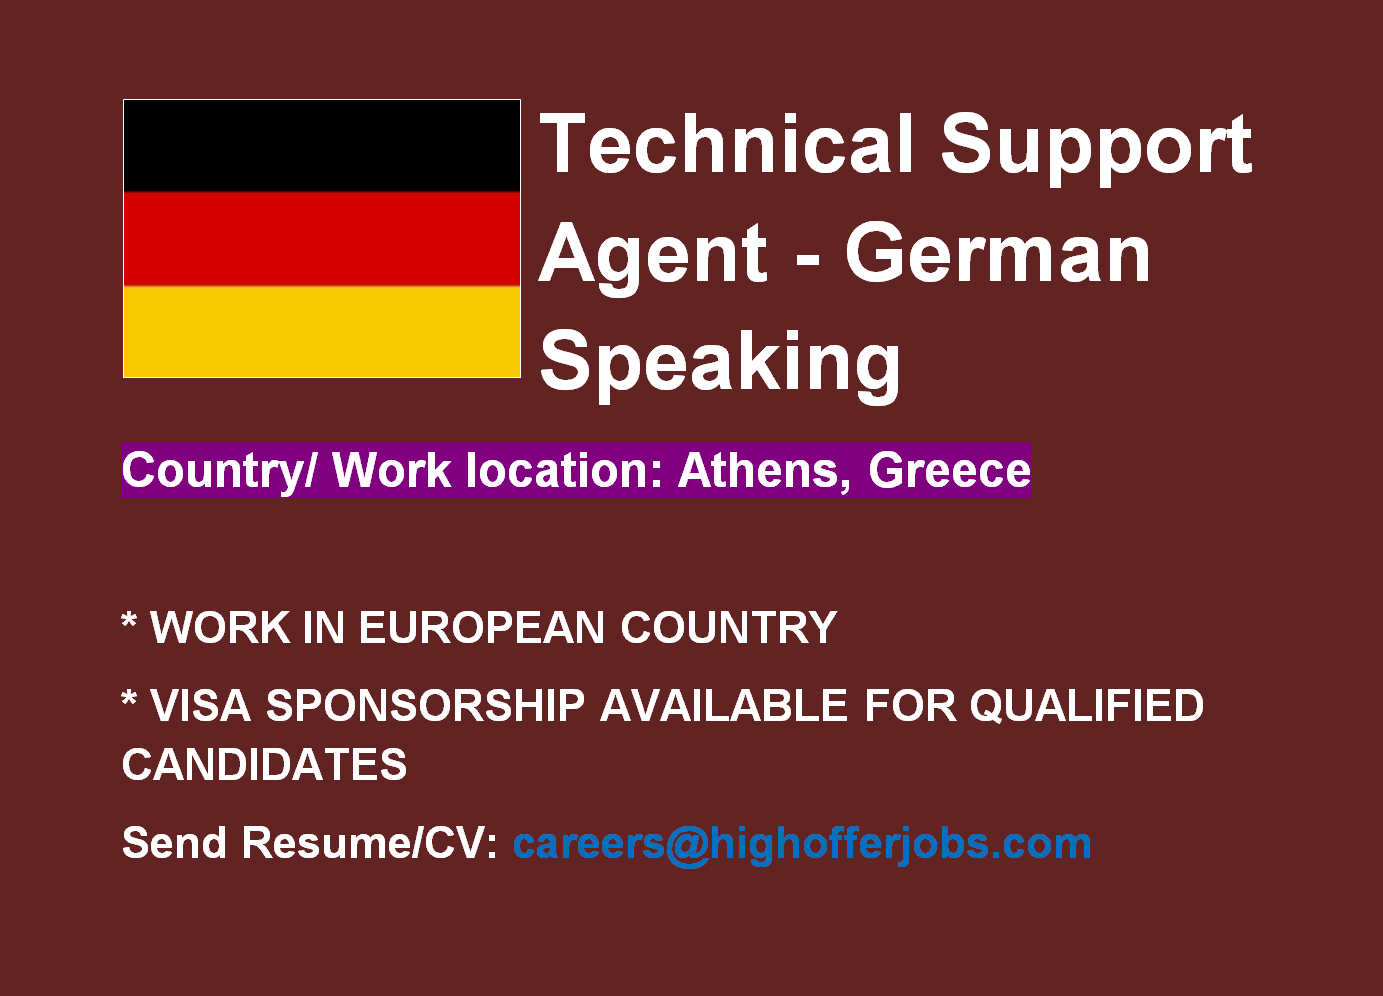 Technical Support Agent - German Speaking - Athens